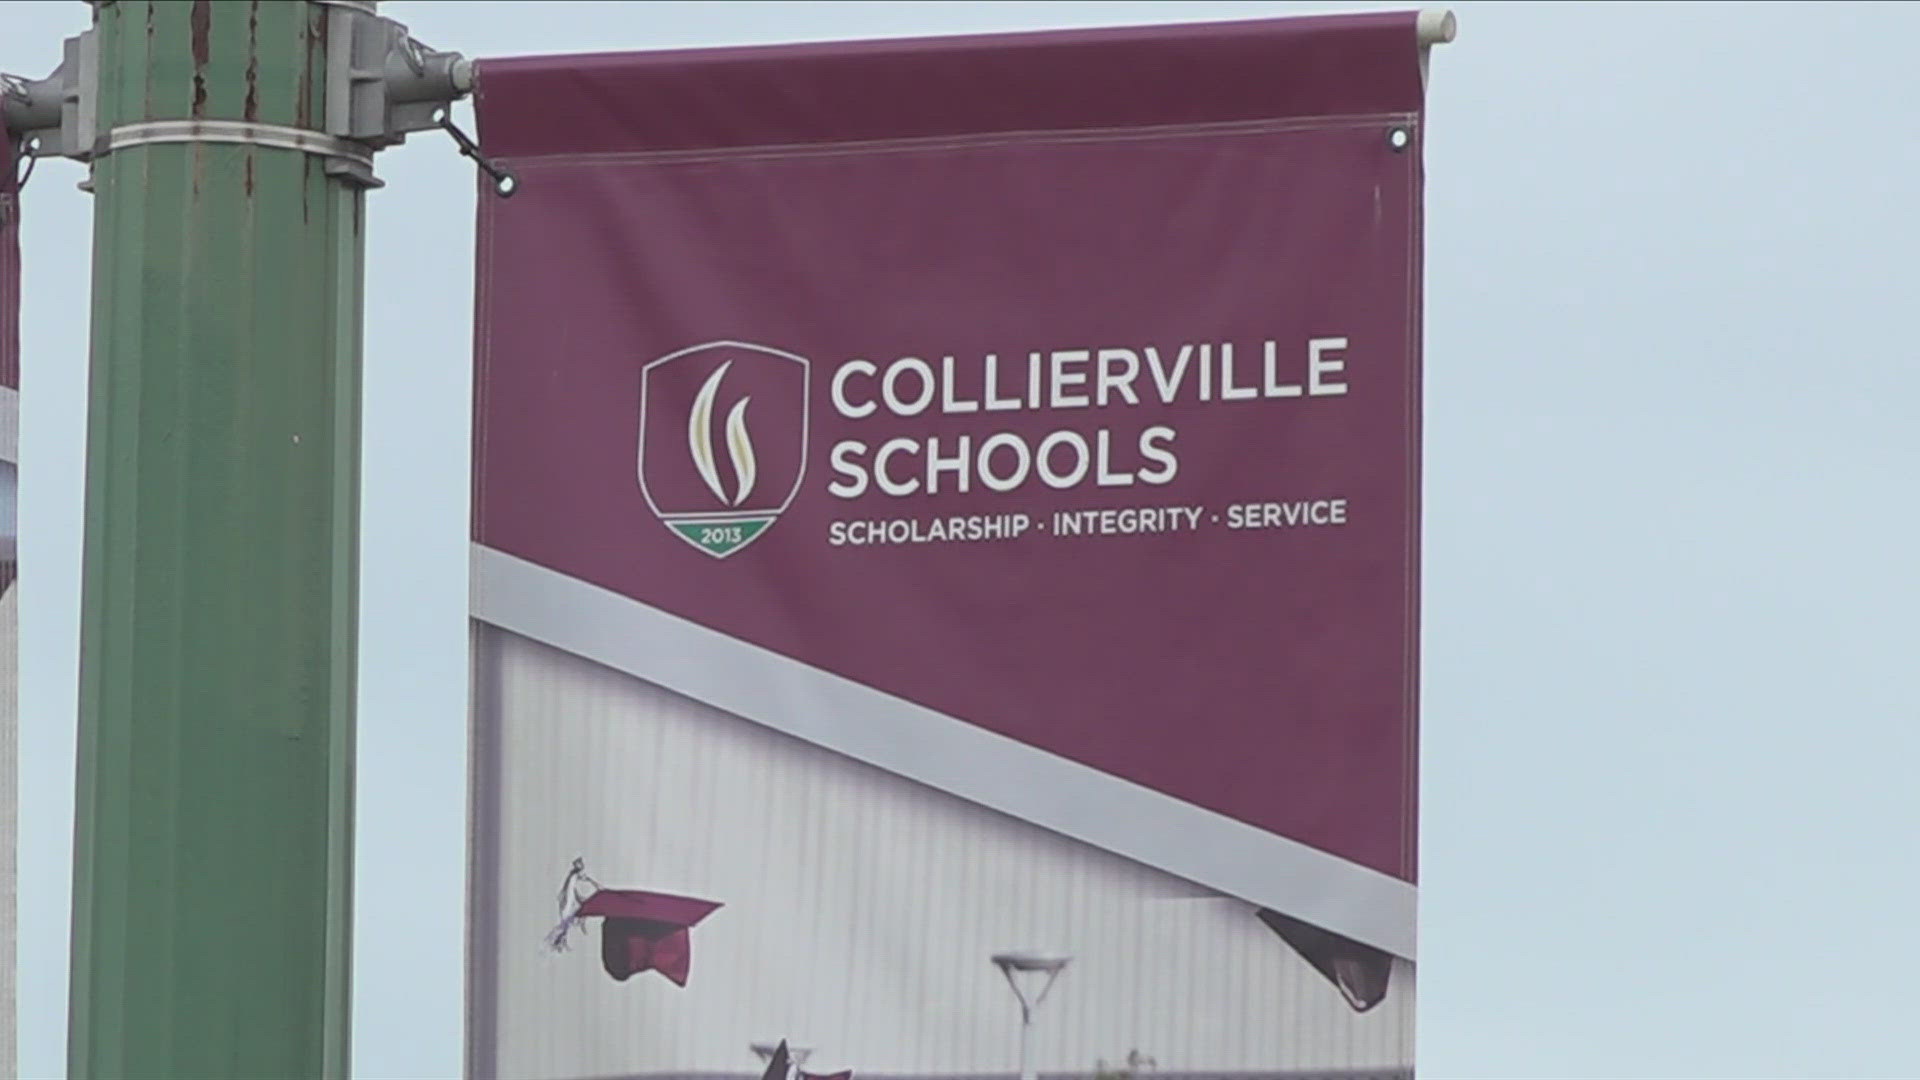 The Collierville Girls Varsity basketball head coach and assistant coach are reportedly both out of jobs, even after taking the team to the Sweet 16 recently.